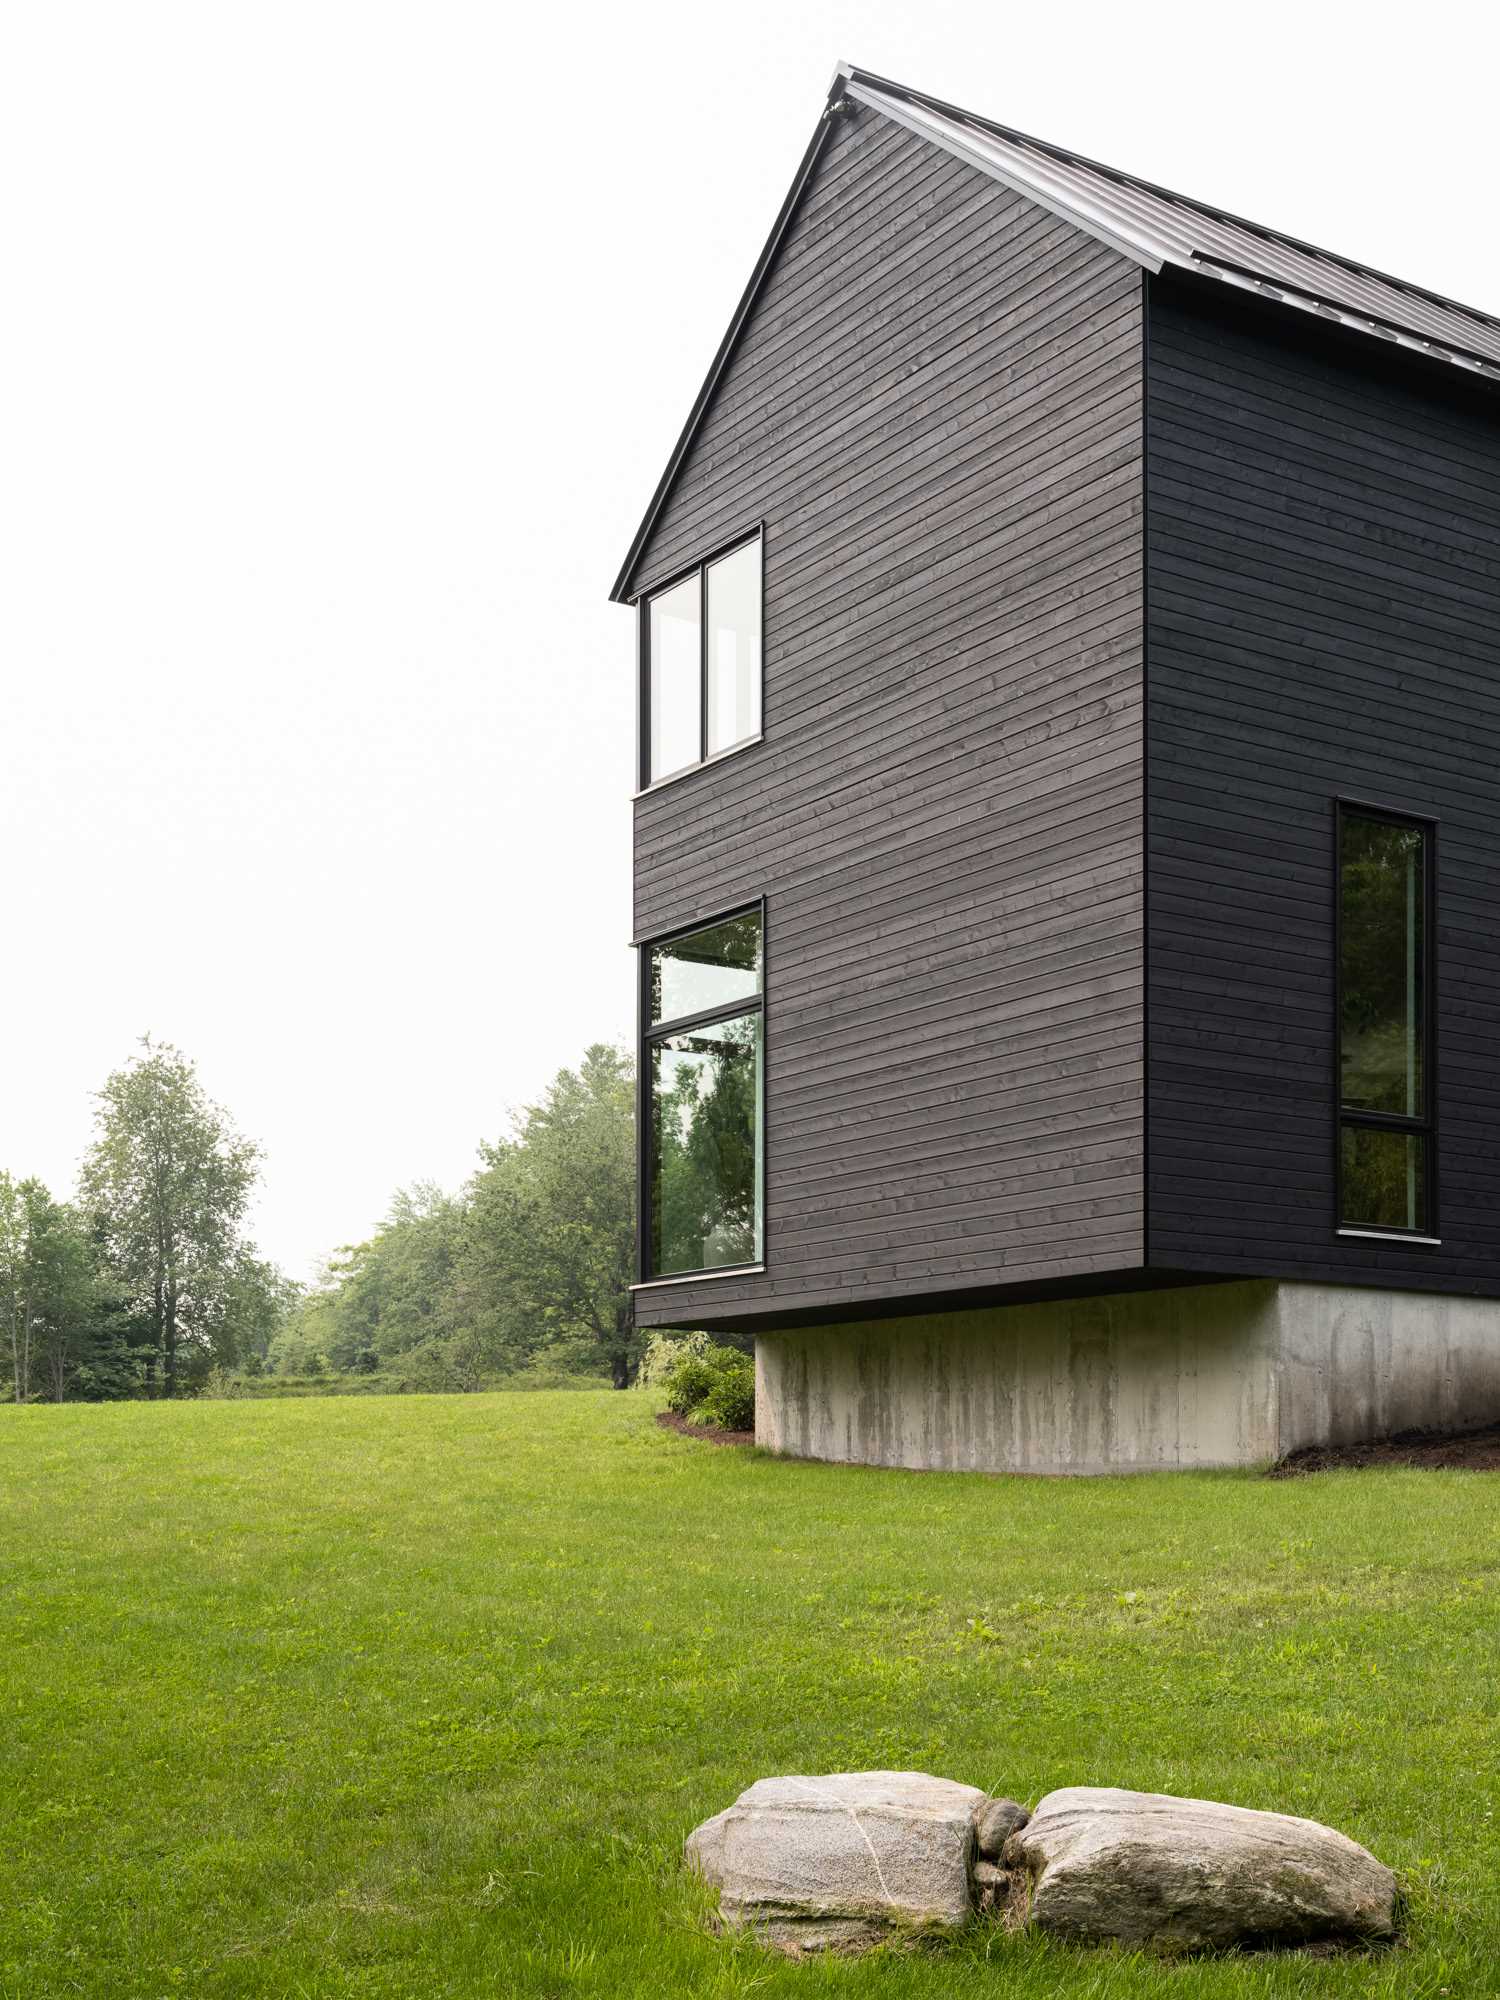 This modern house, surrounded by trees and grass, has a bold exterior clad with black stained wood siding and a standing seam metal roof.